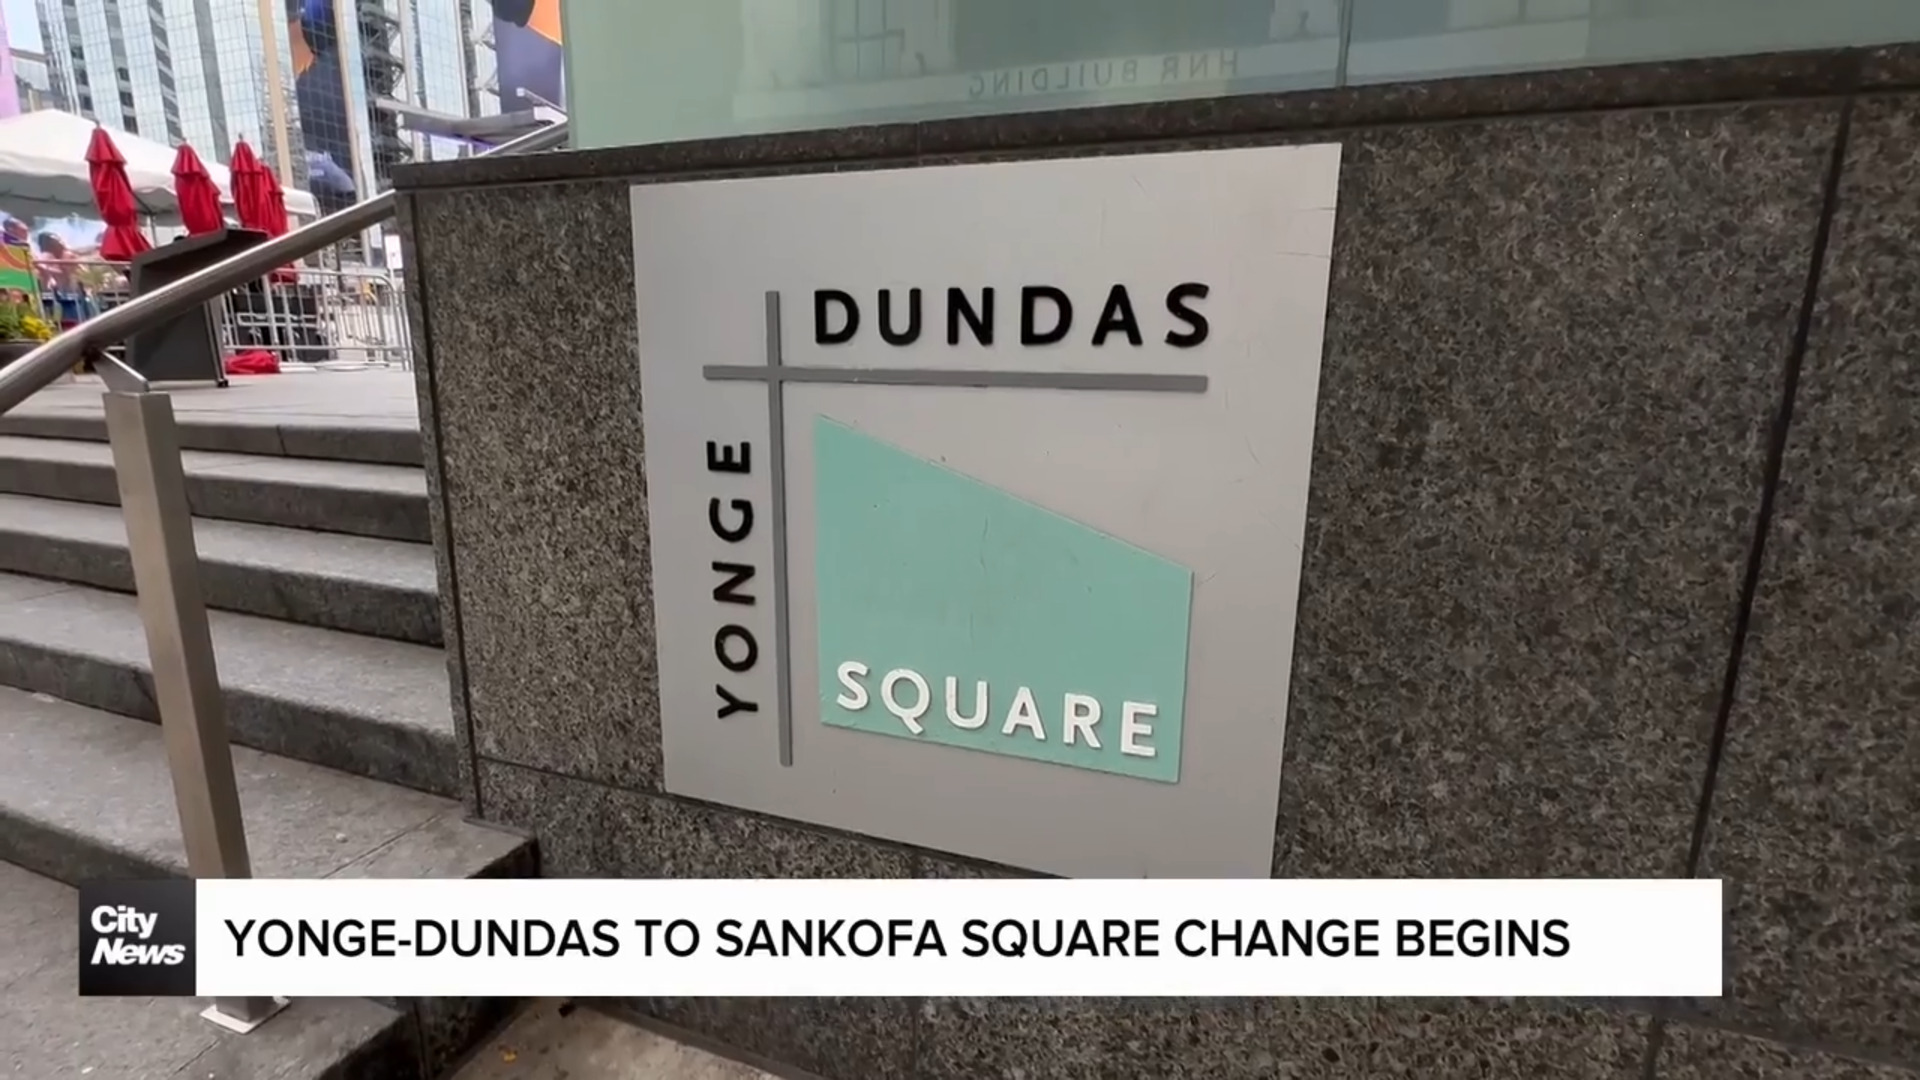 Transformation from Yonge-Dundas to Sankofa Square begins with signage